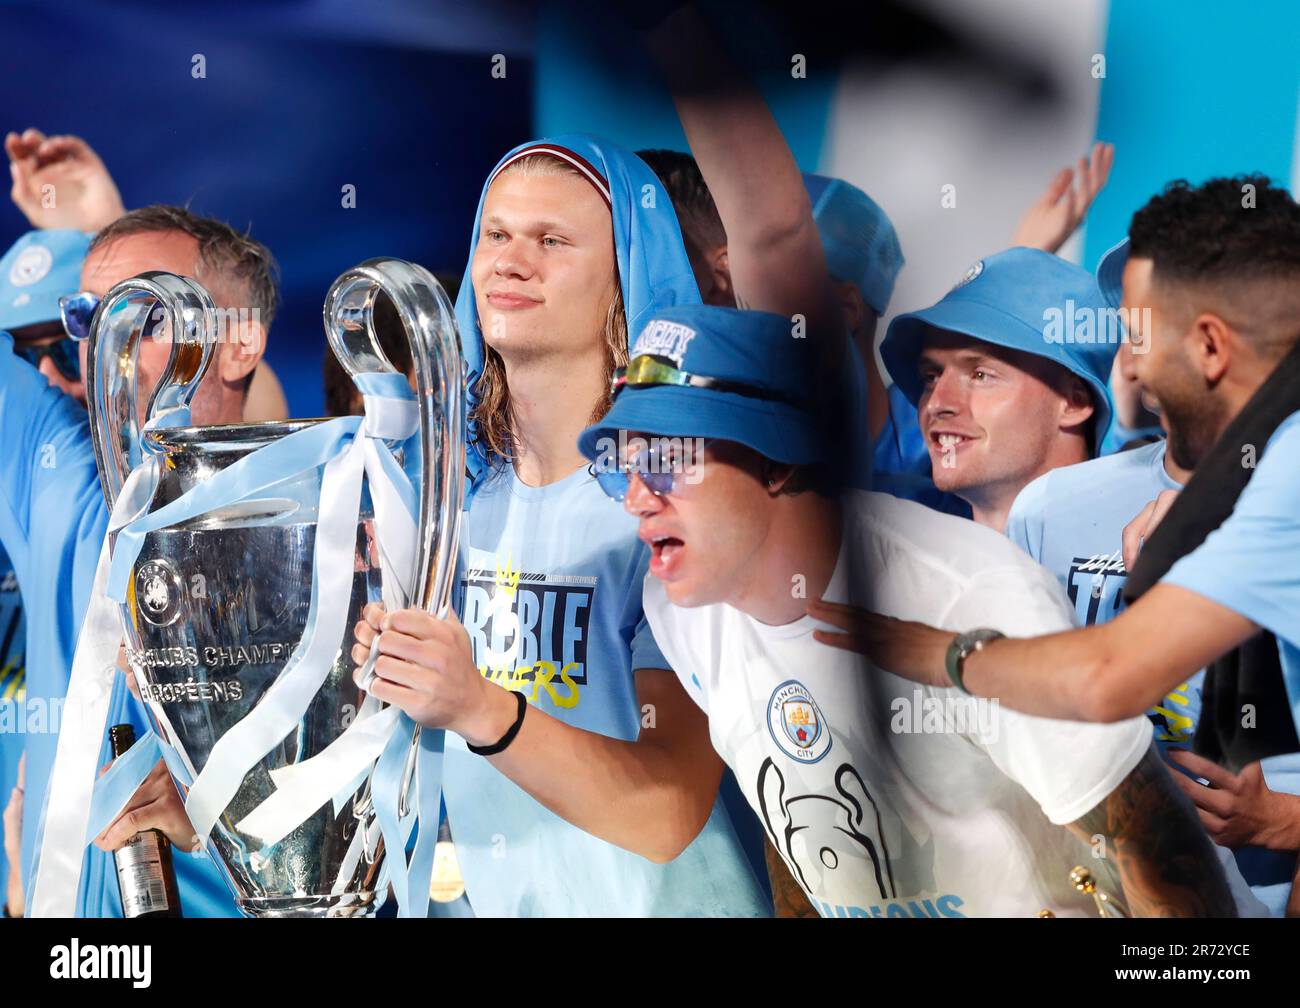 UEFA Champions League: How Erling Haaland 'completed' Manchester City 